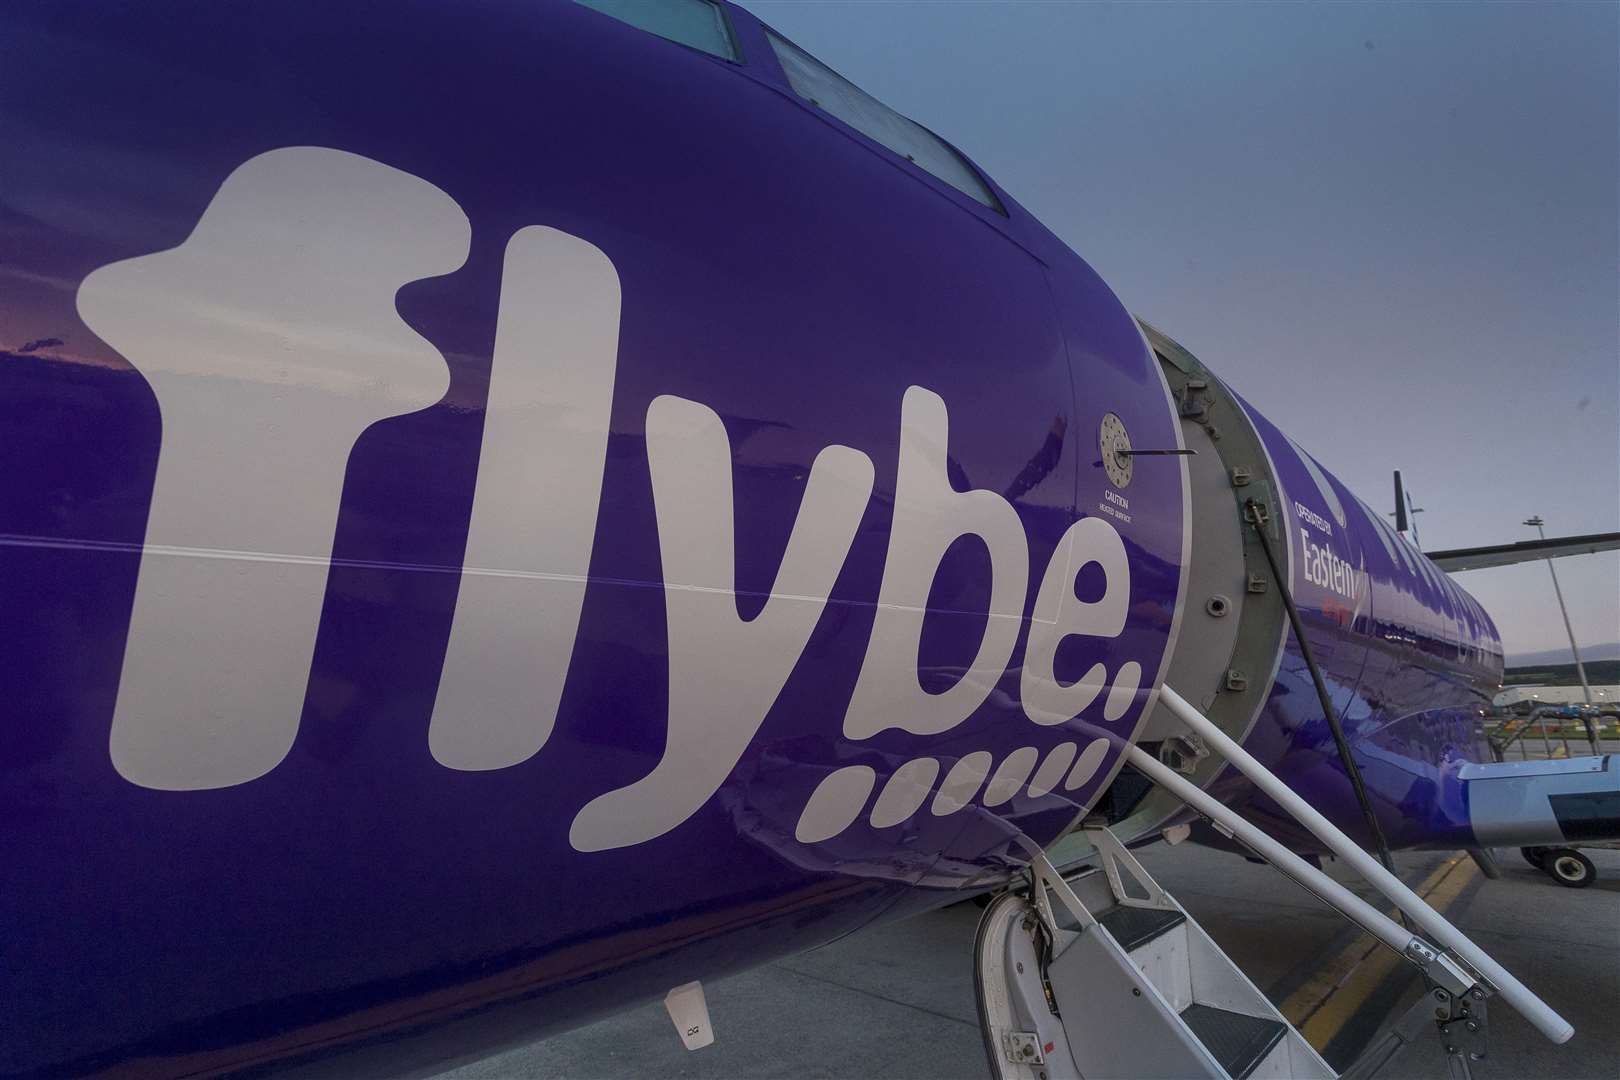 A Flybe aircraft